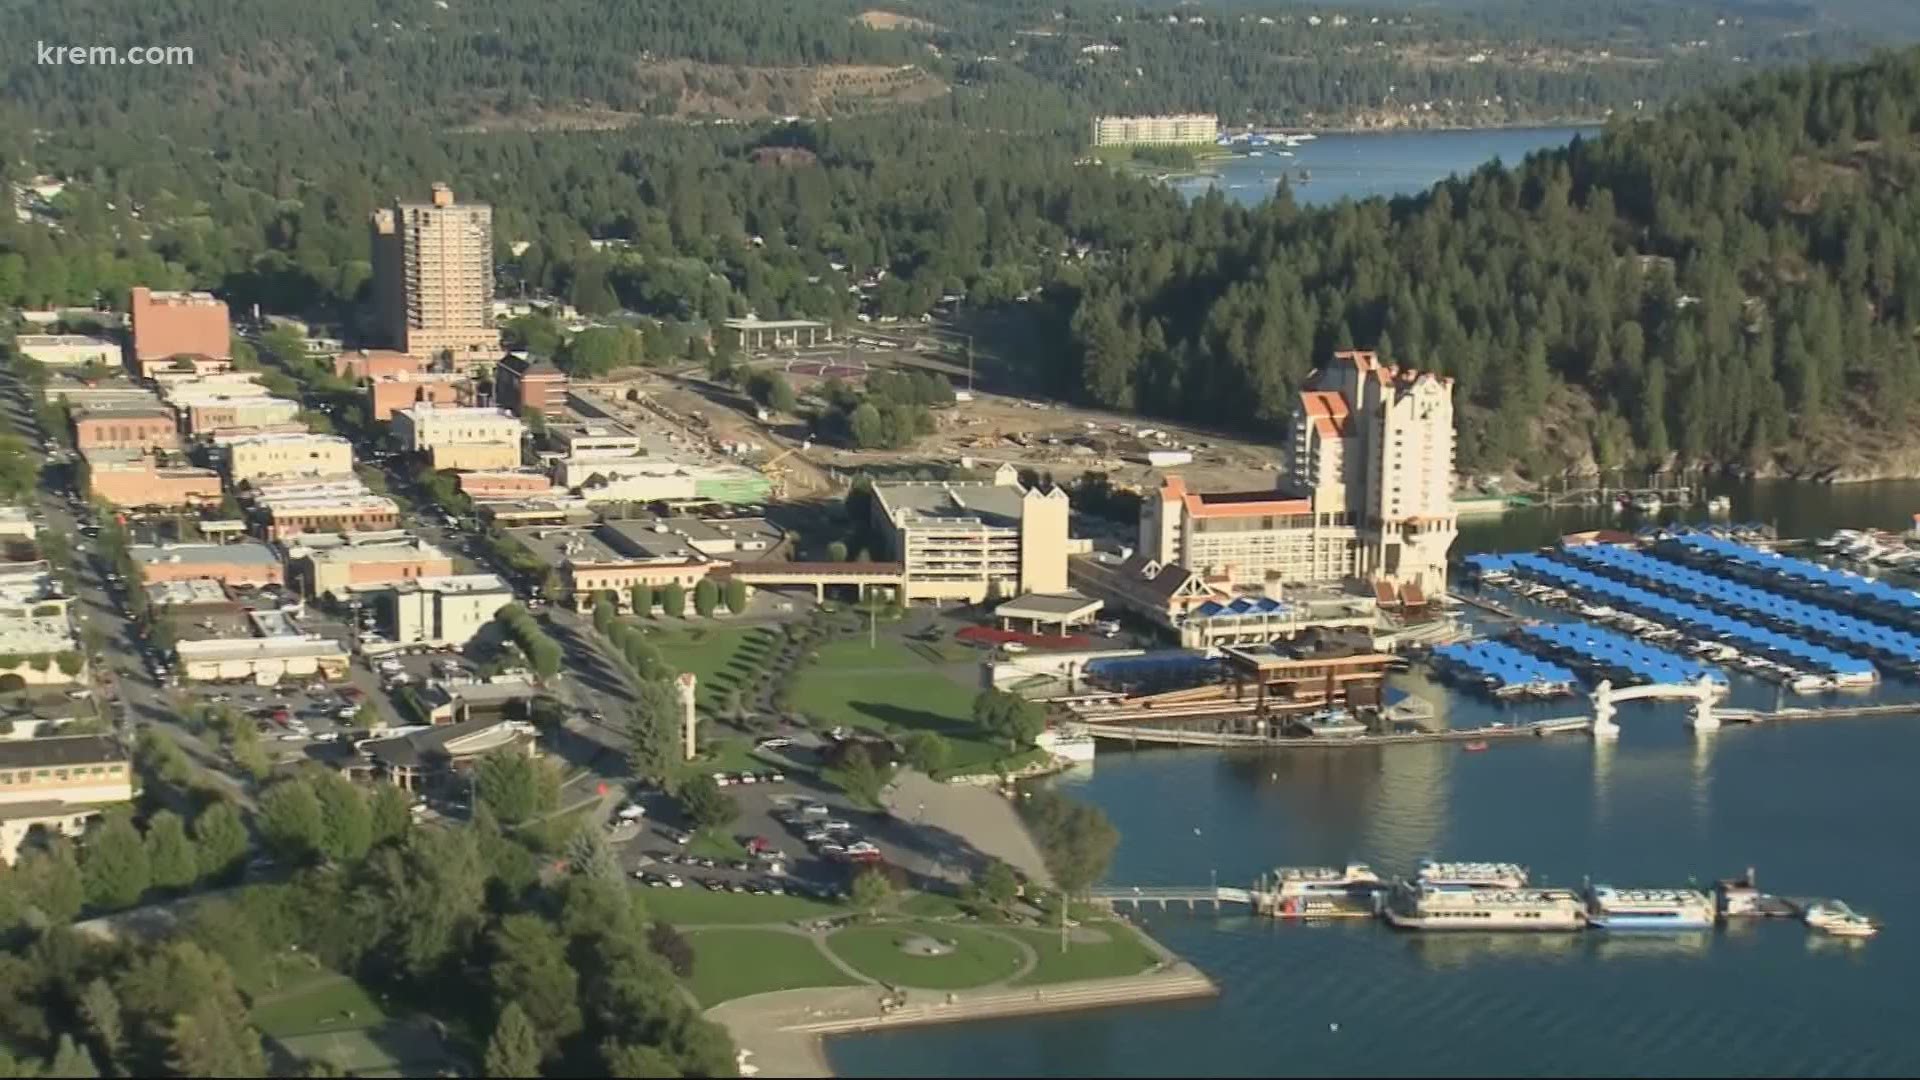 The Wall Street Journal reports that the median sales price in the Coeur d'Alene region rose in March to $476,900, an increase of 47% from one year earlier.